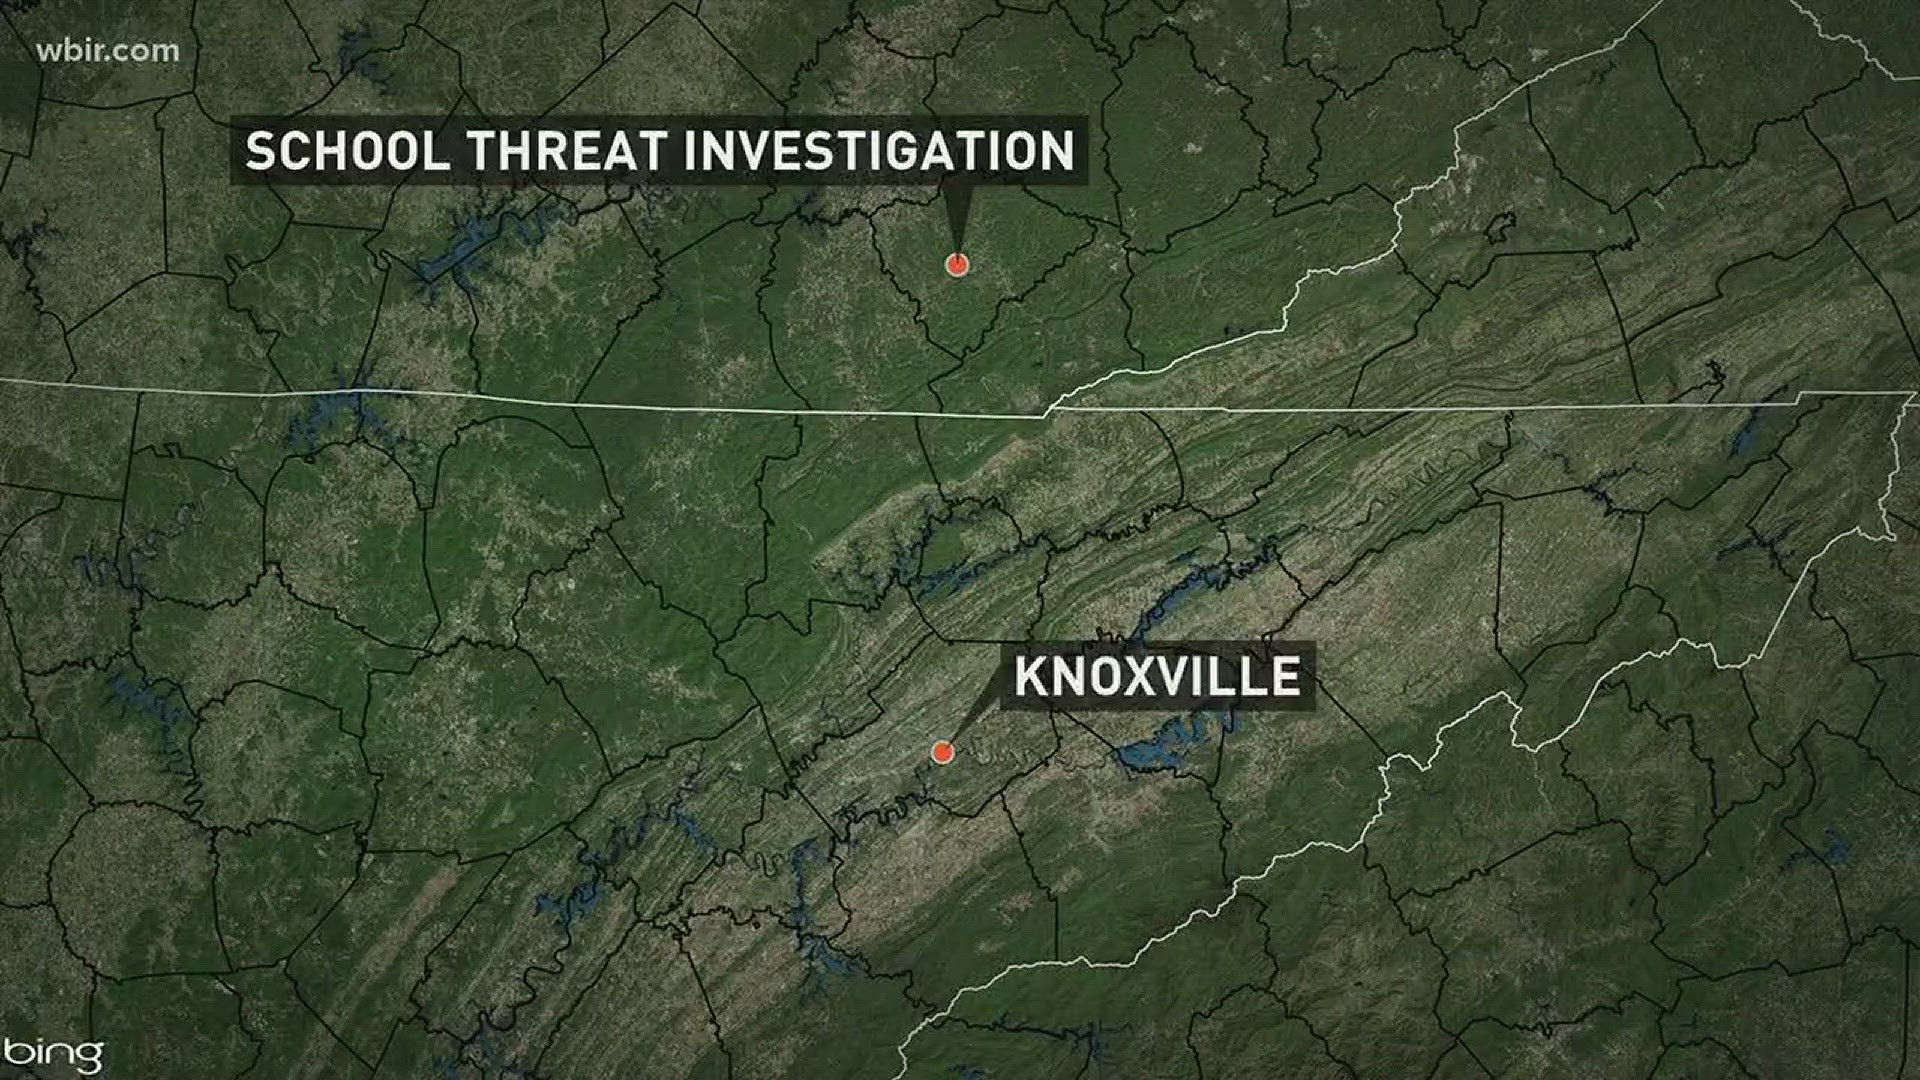 In Knox County, Kentucky, three girls were arrested for sending threats against their school system through social media.